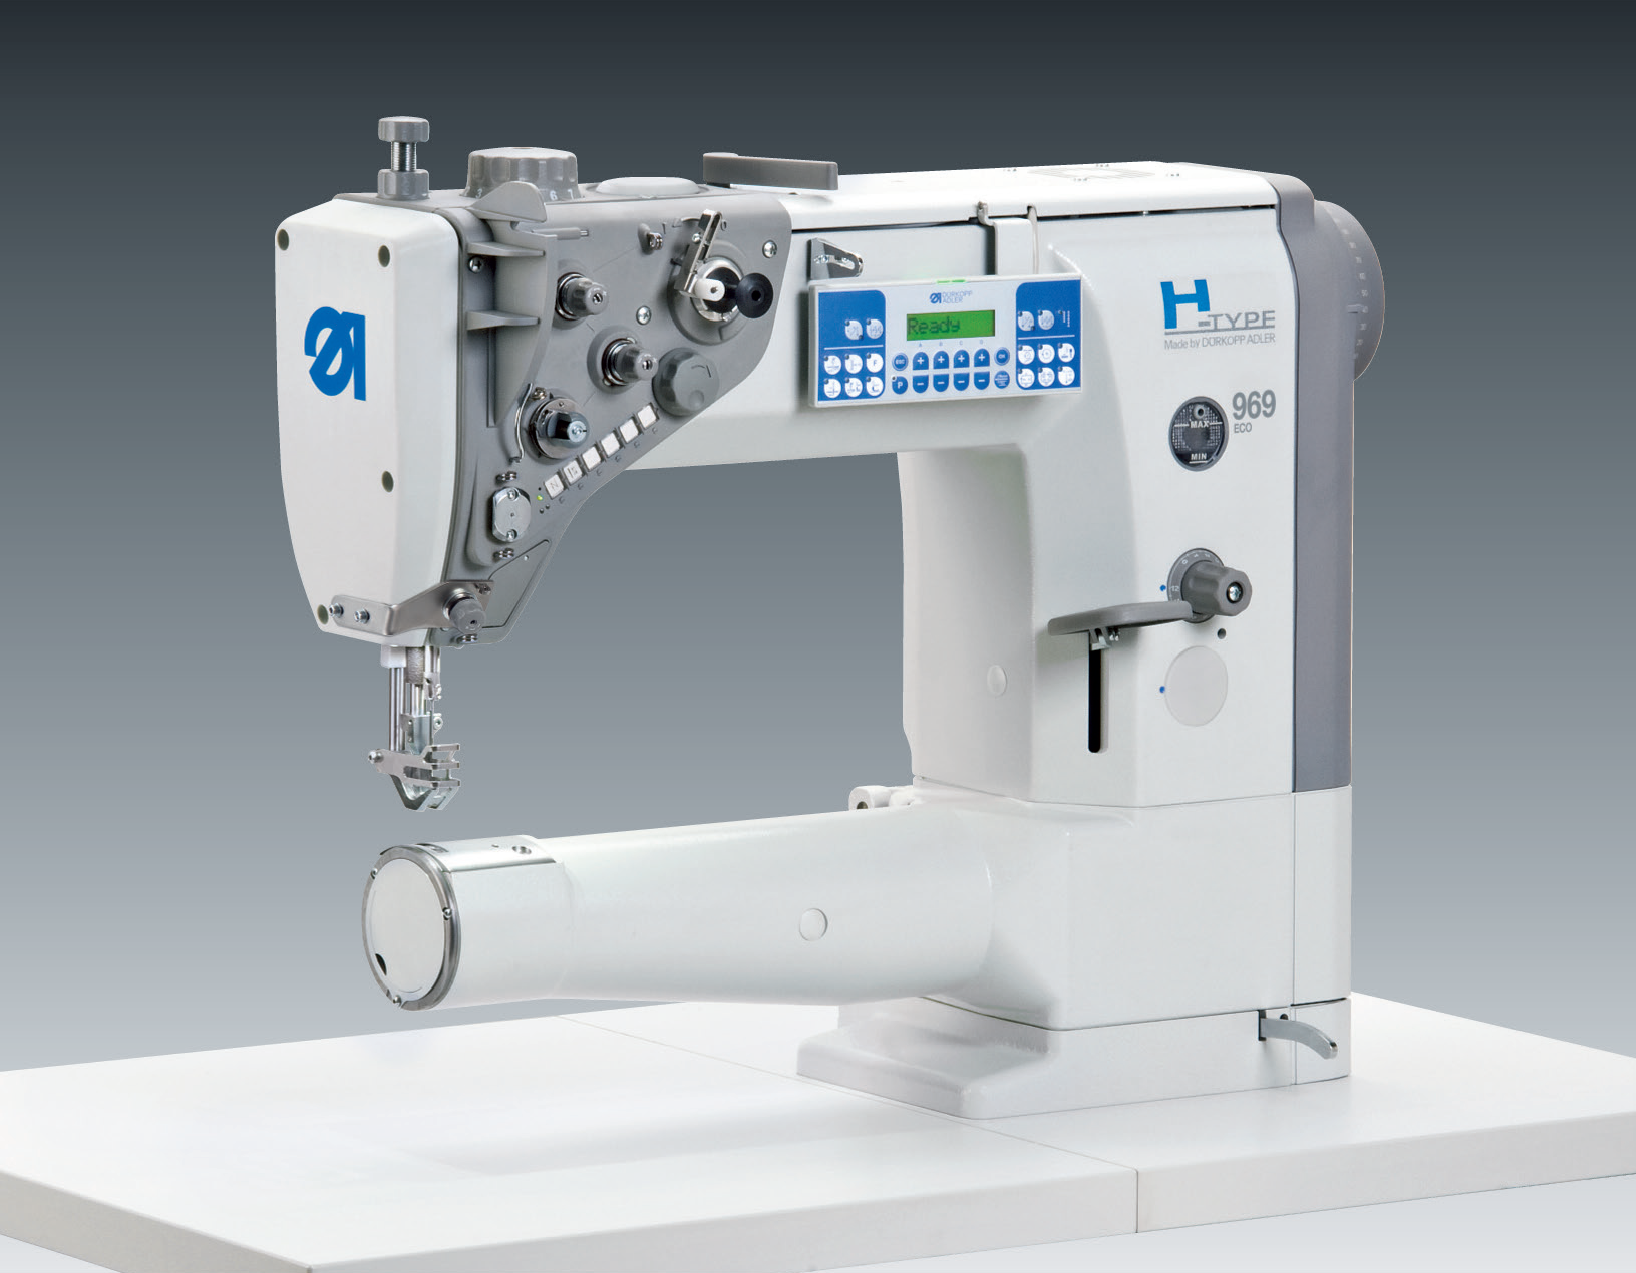 H-TYPE 969 – ECO version of the cylinder arm machine for extreme applications